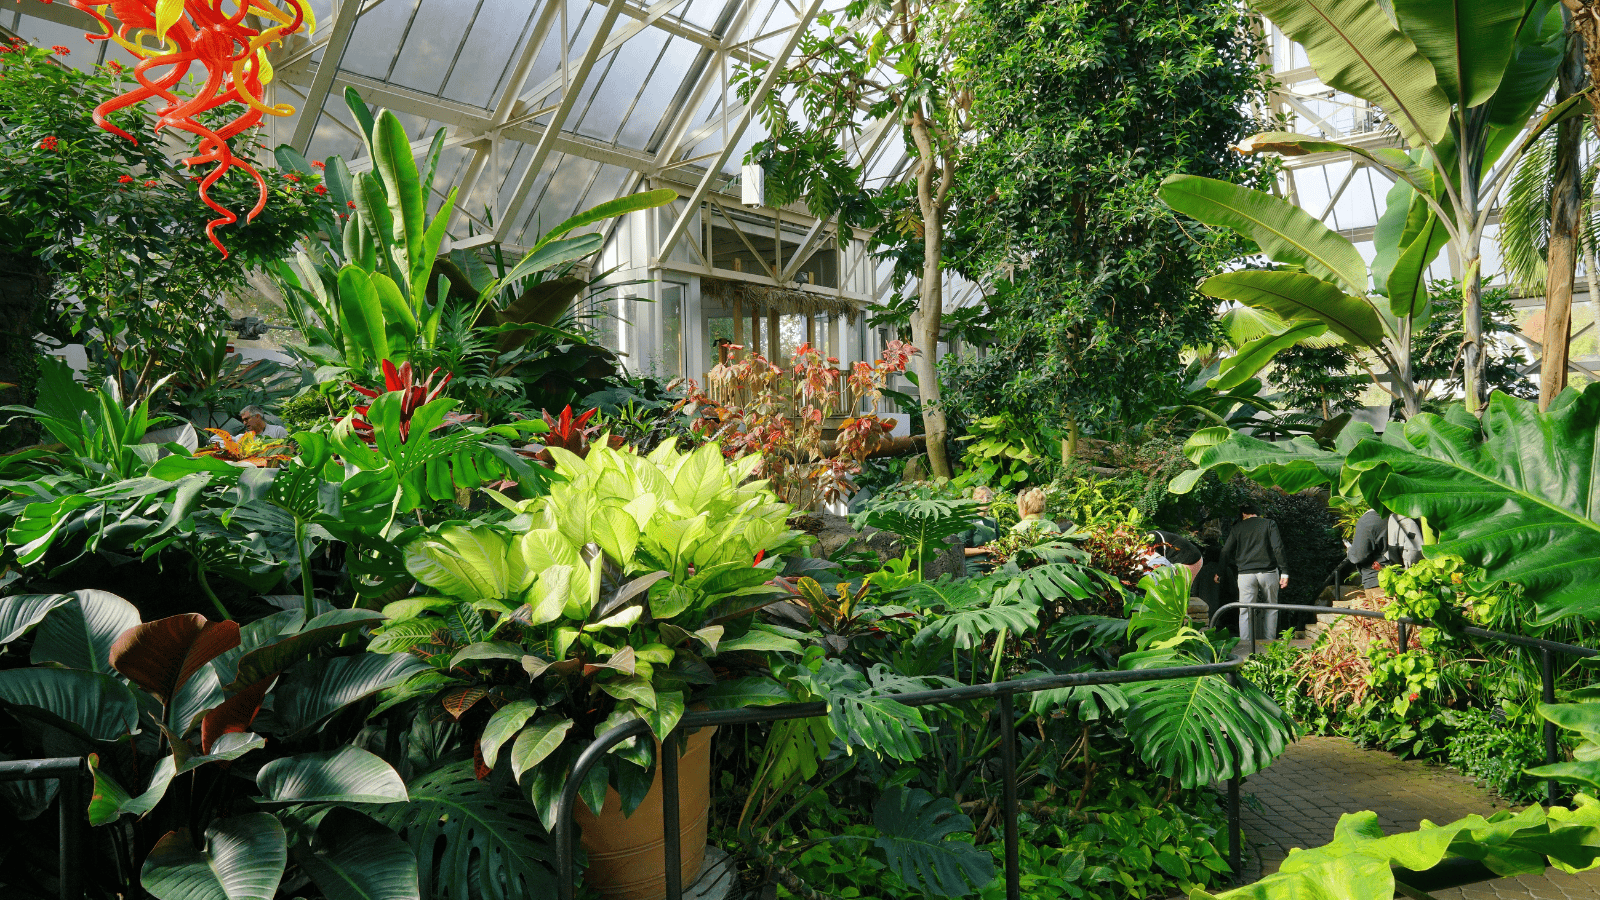 <p>Ohio’s <a href="https://www.fpconservatory.org/" rel="nofollow external noopener noreferrer">Franklin Park Conservatory and Botanic Gardens</a> are an exceptional display of natural beauty. Based in Columbus, the gardens have everything from a palm house to a historic conservatory and art gallery. Franklin Park hosts many seasonal events, such as craft workshops, garden classes, and adults-only cocktail hours.</p>